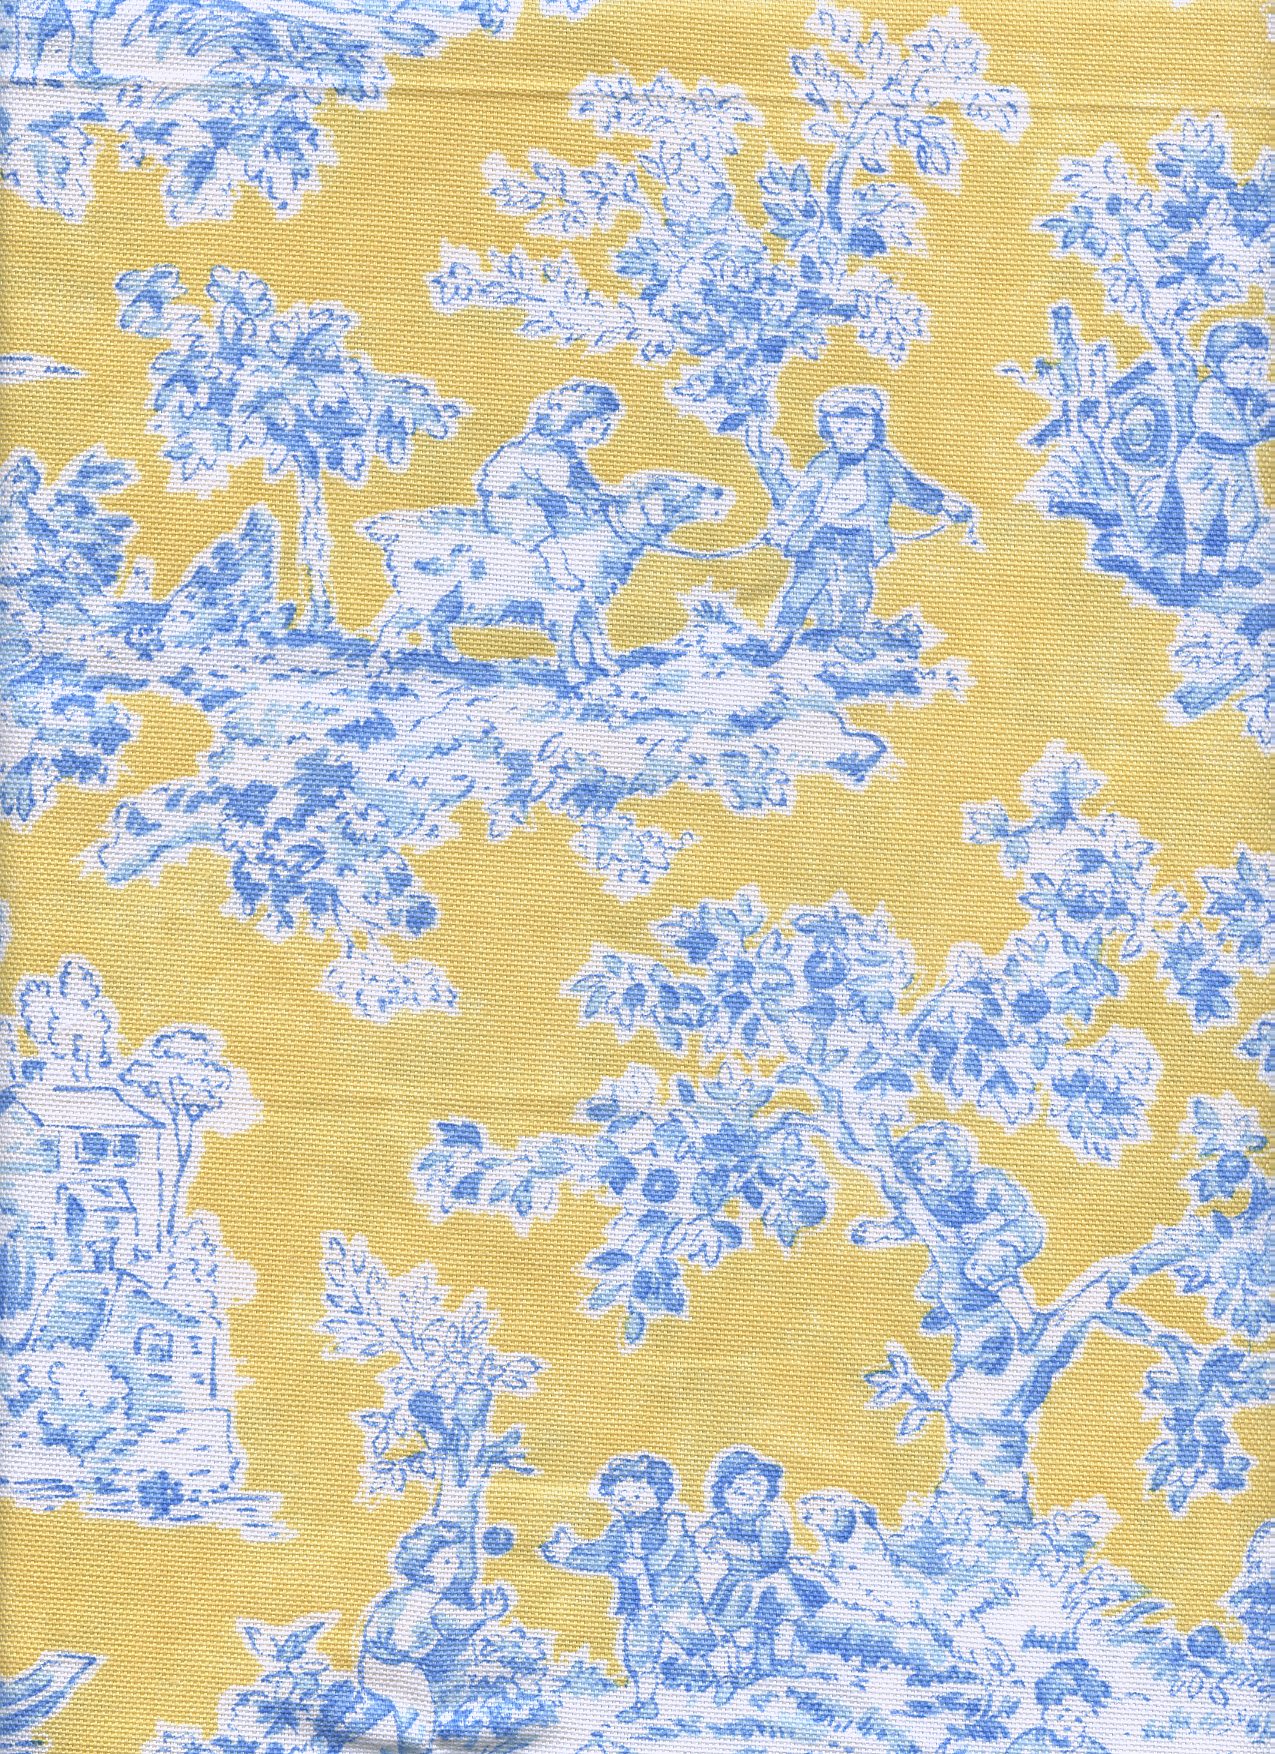 Braemore "Just us Kids" Yellow and Blue Toille